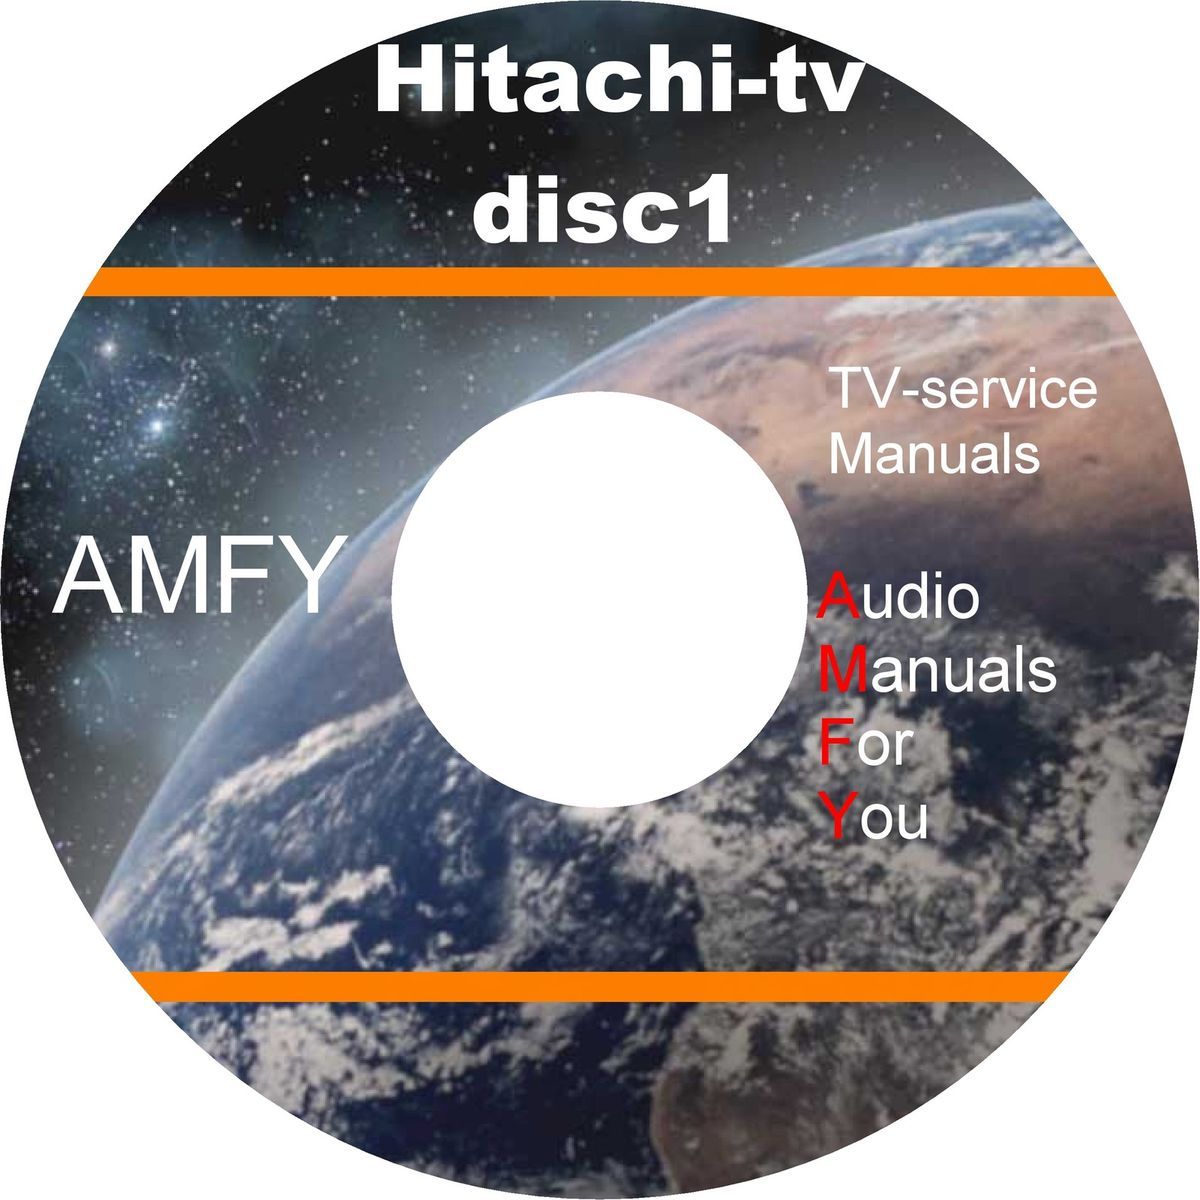 HITACHI TV service manuals trainings manuals and schematics on 3 dvd